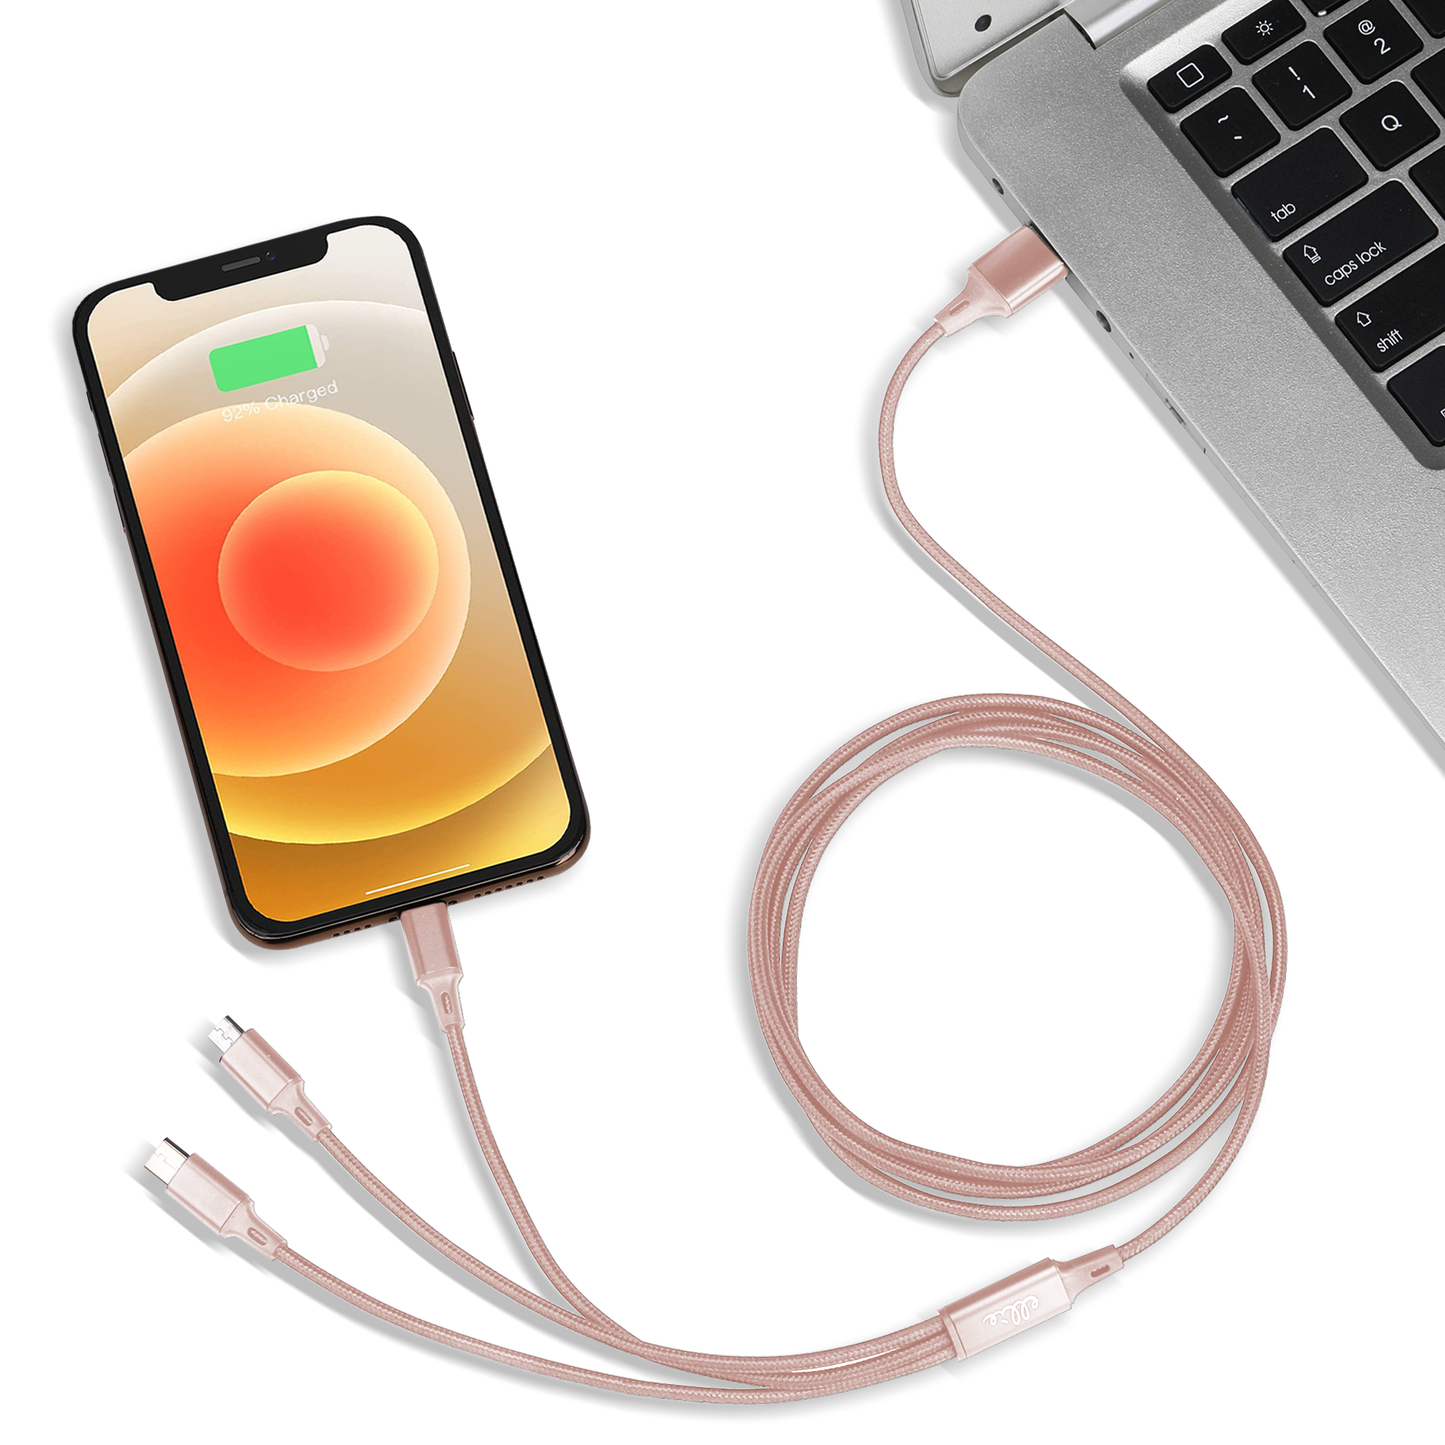 3-in-1 Charging Cable 6 Ft Nylon - Rose Gold